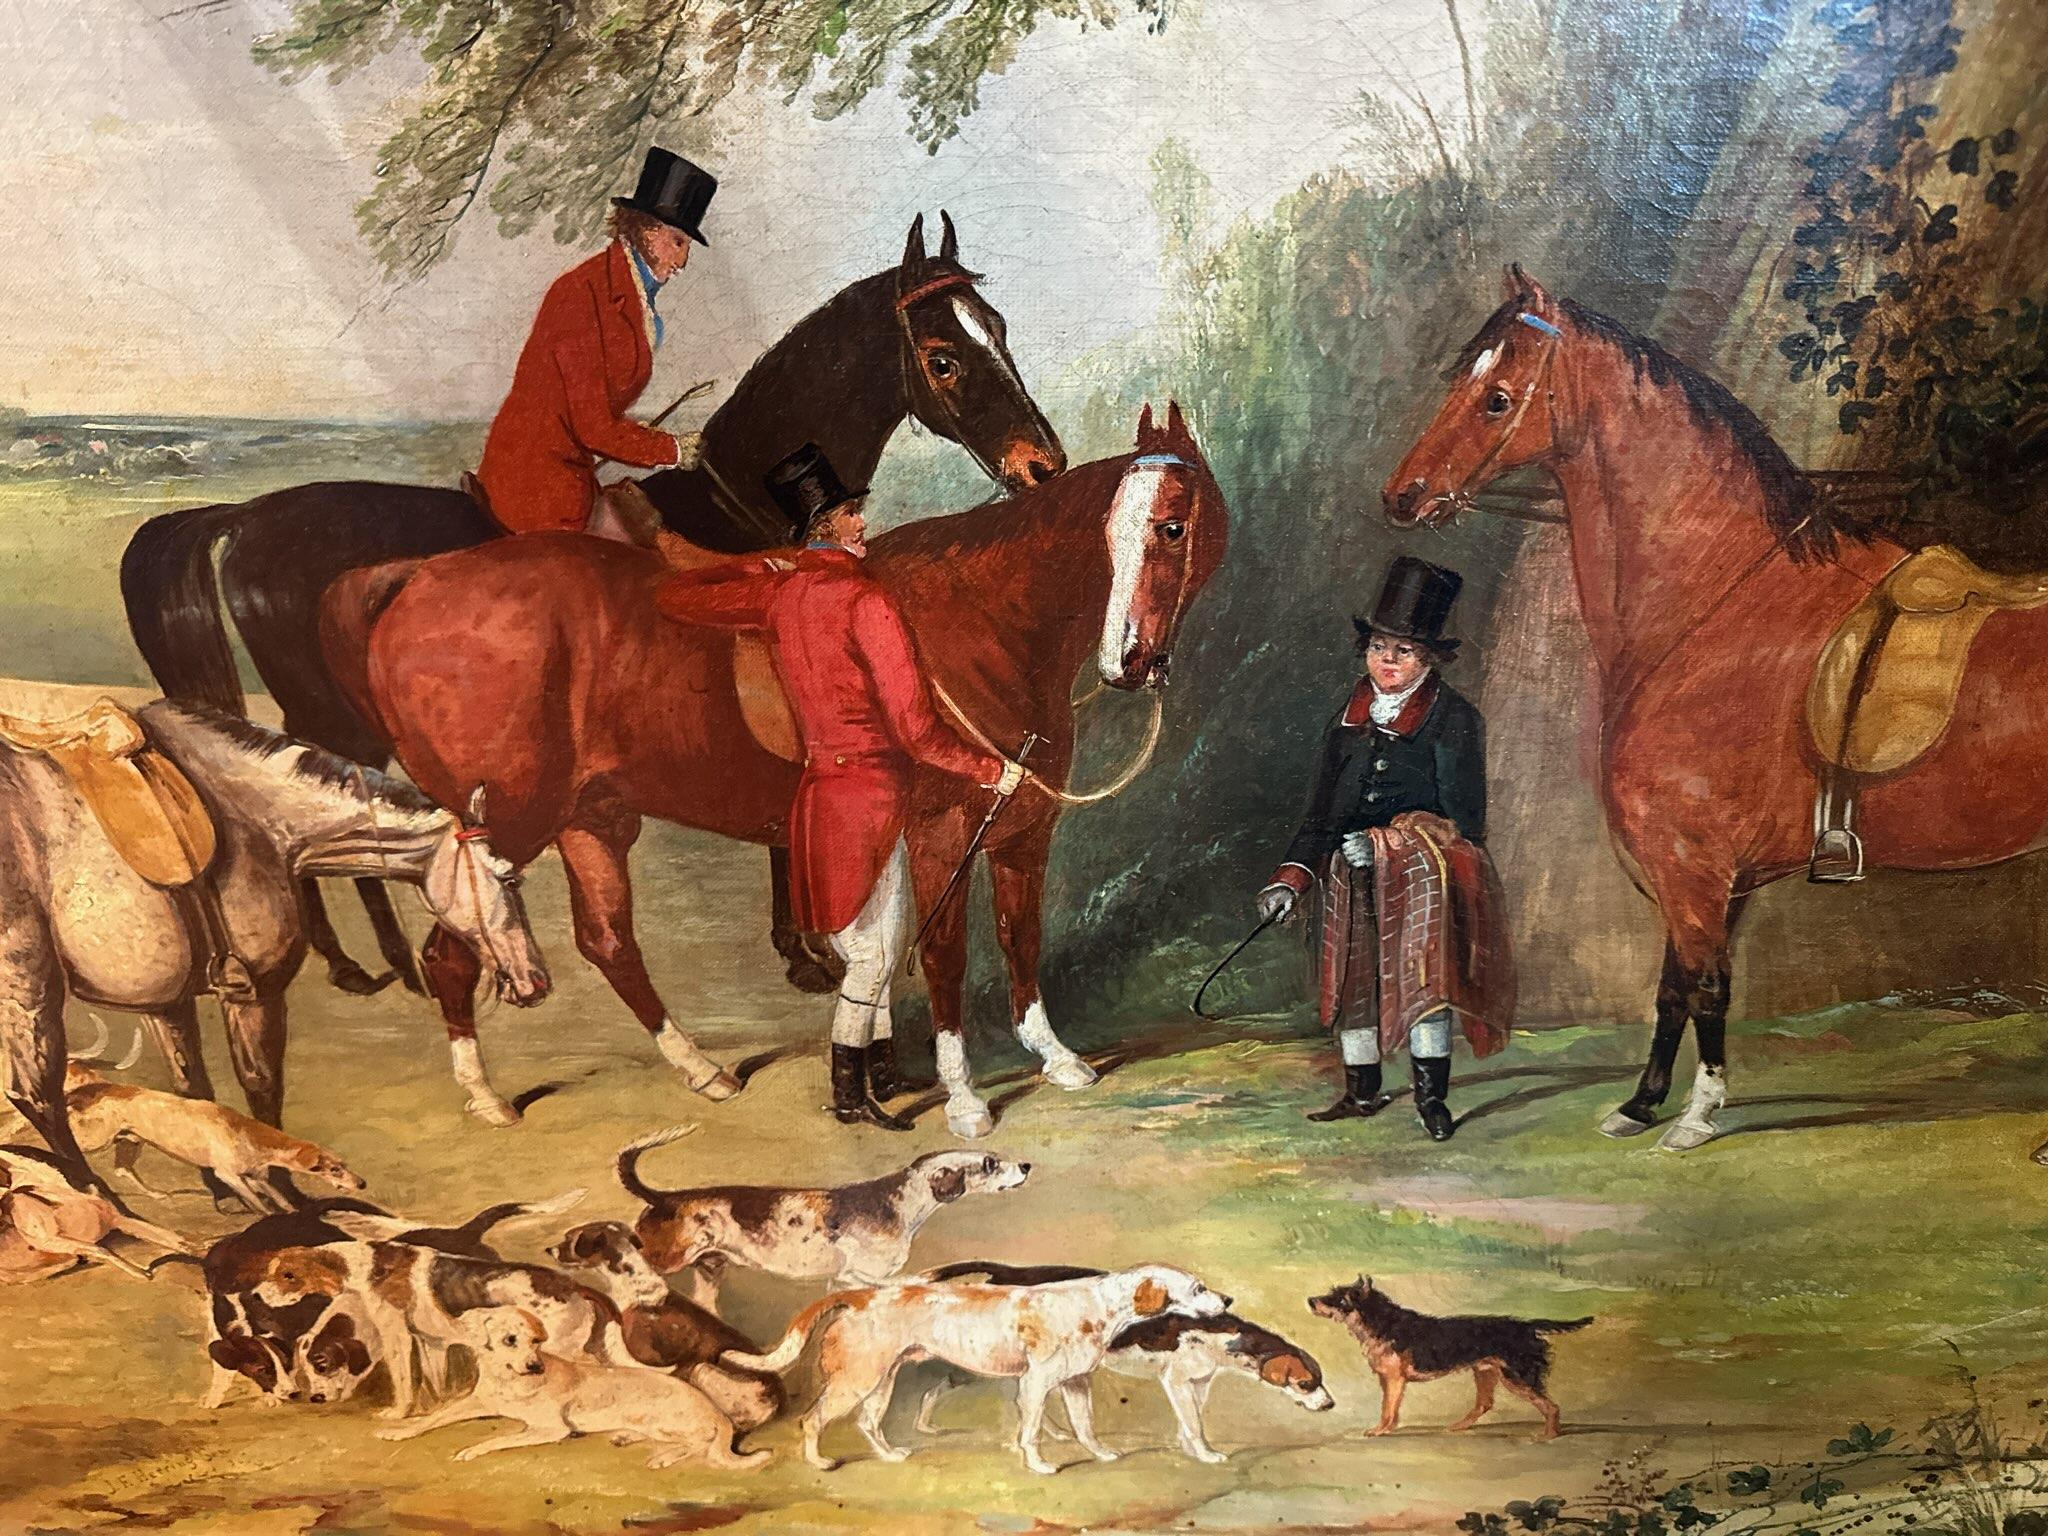 Large Mid 19th Century Fox Hunt Painting by John Frederick Herring Sr.
England, 1840-1860. Measures: 30